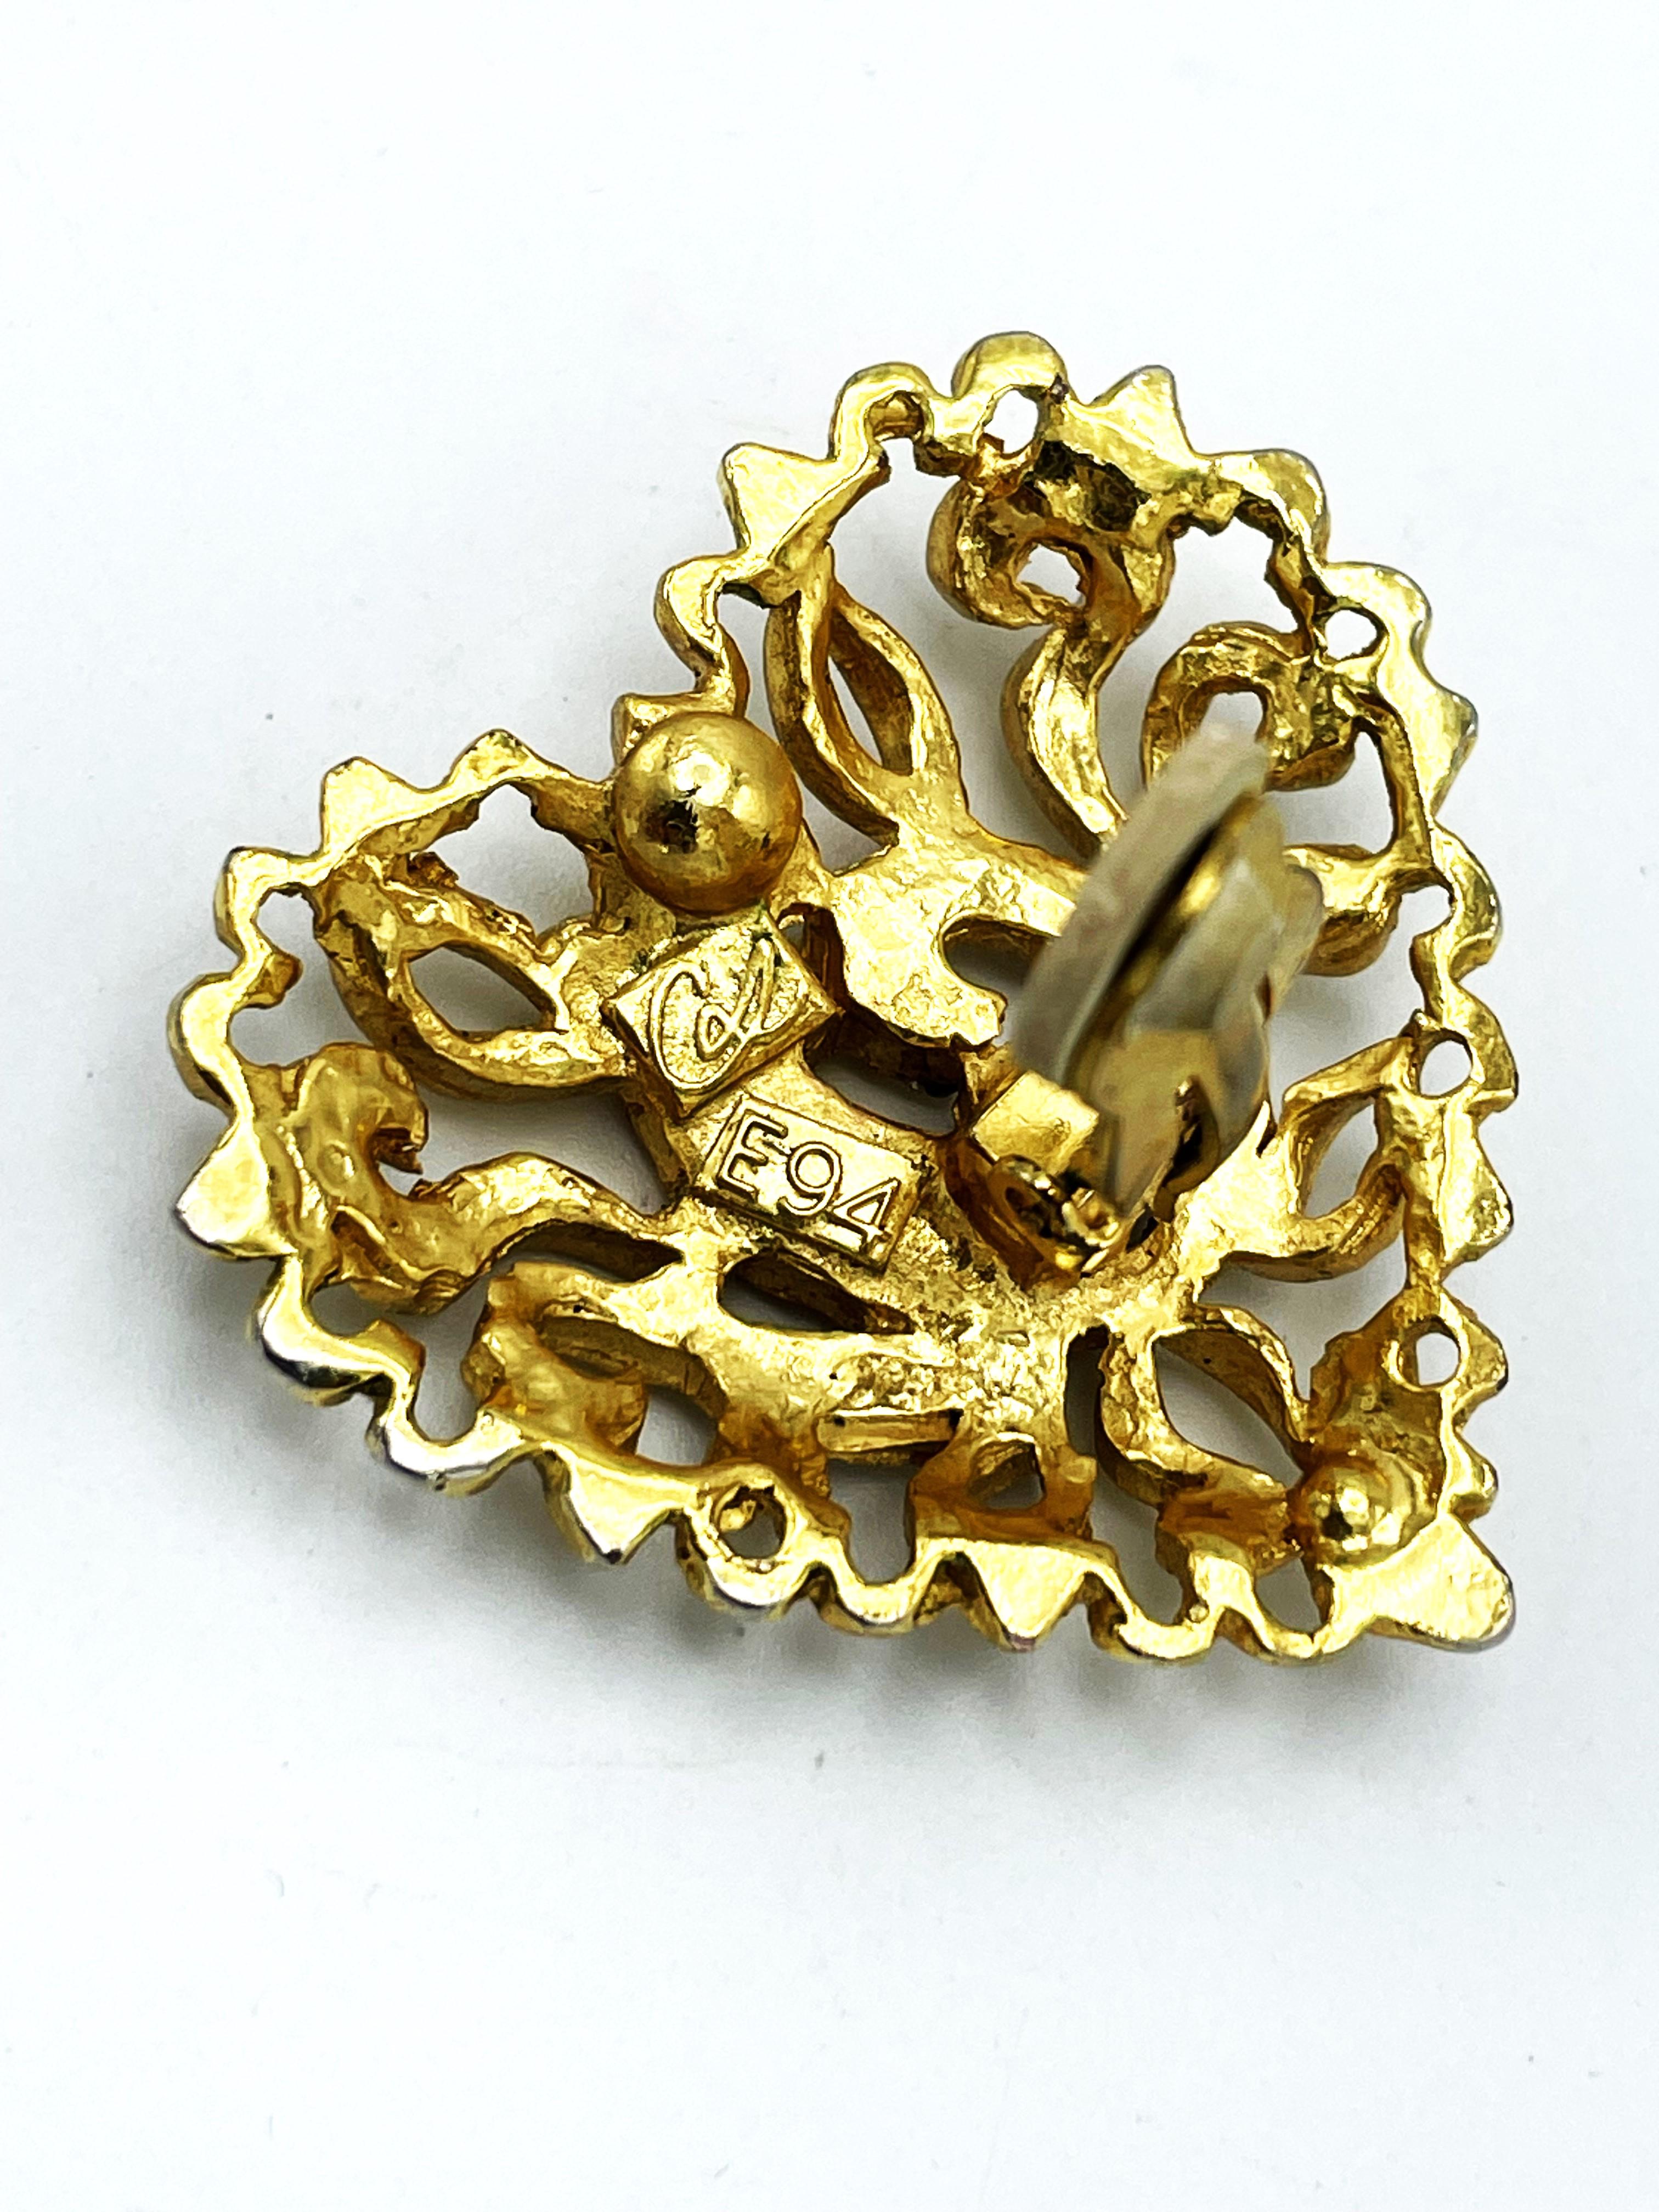 CLIP-ON EARRING by Christian Lacroix Paris, openwork heart, gold-plated, E 95 For Sale 2